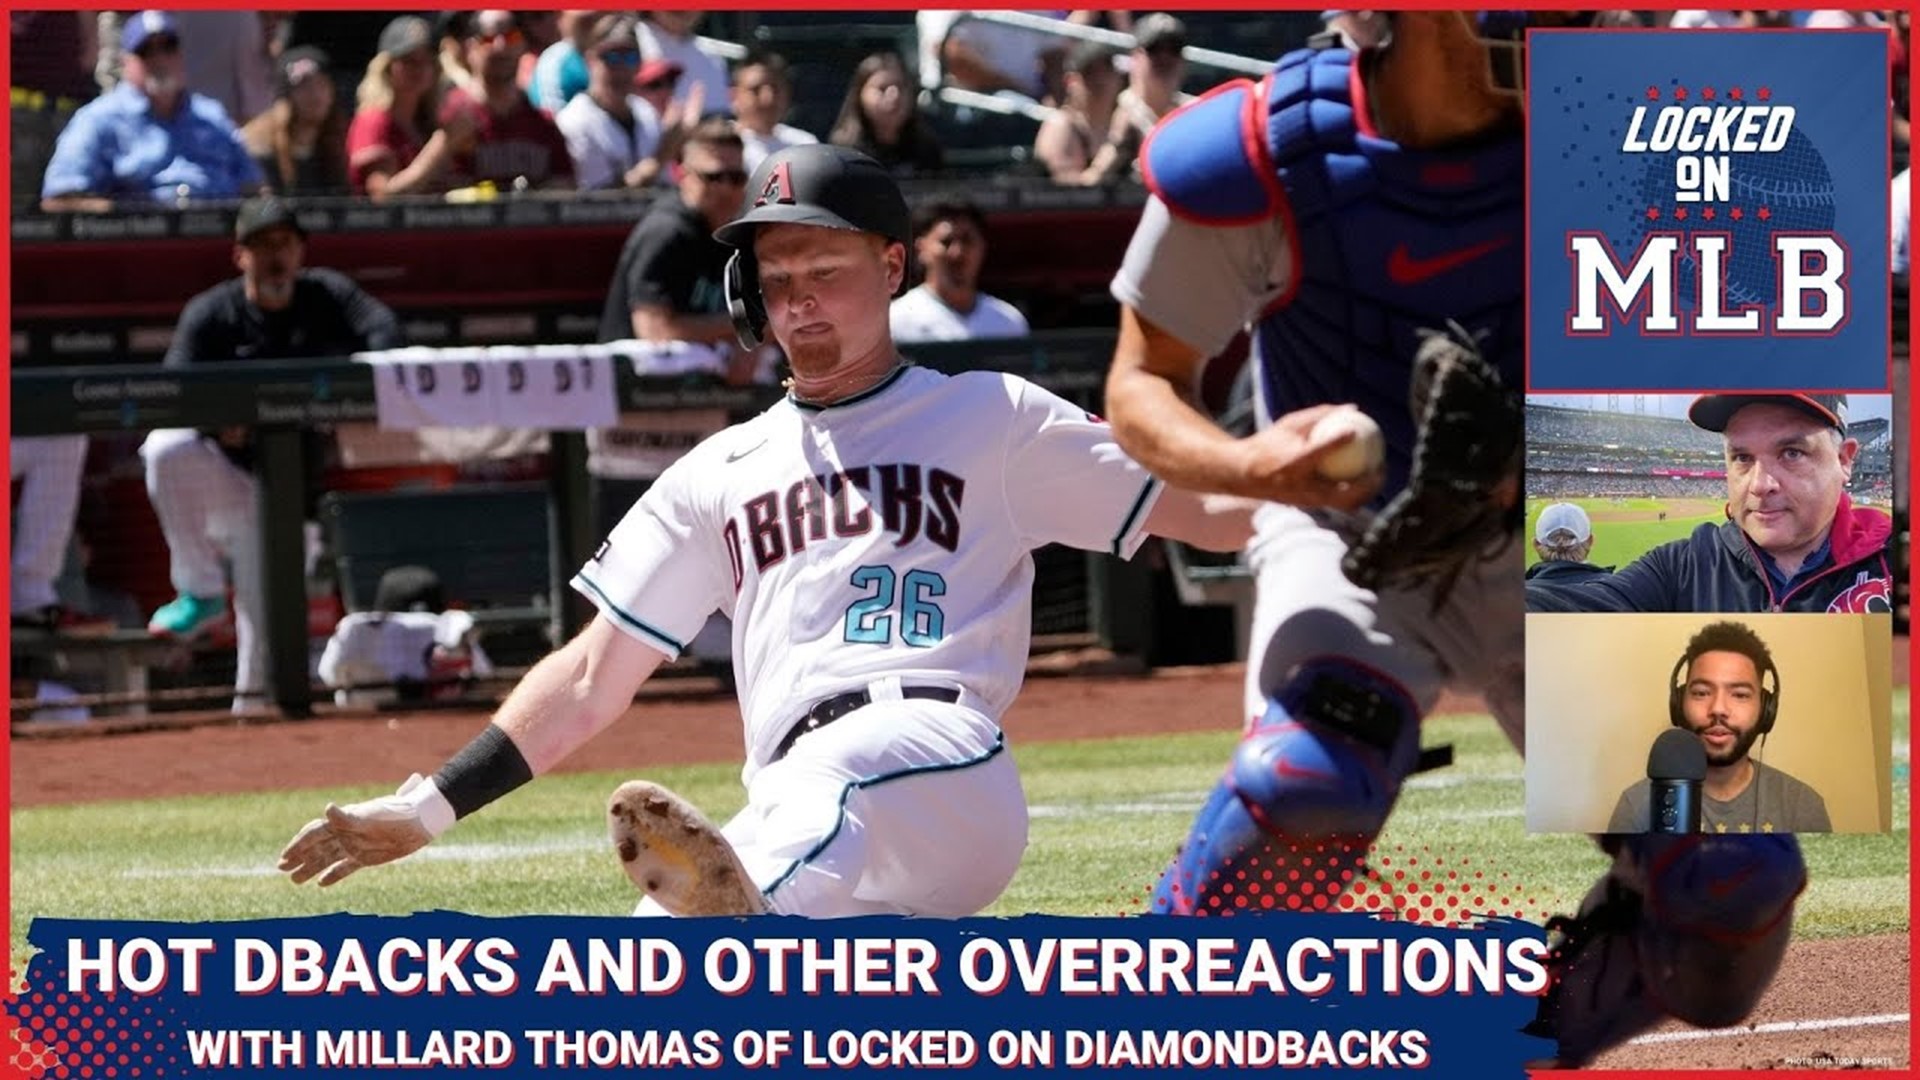 Locked on MLB - Hot D'Backs Plus Other Overreations with Millard Thomas